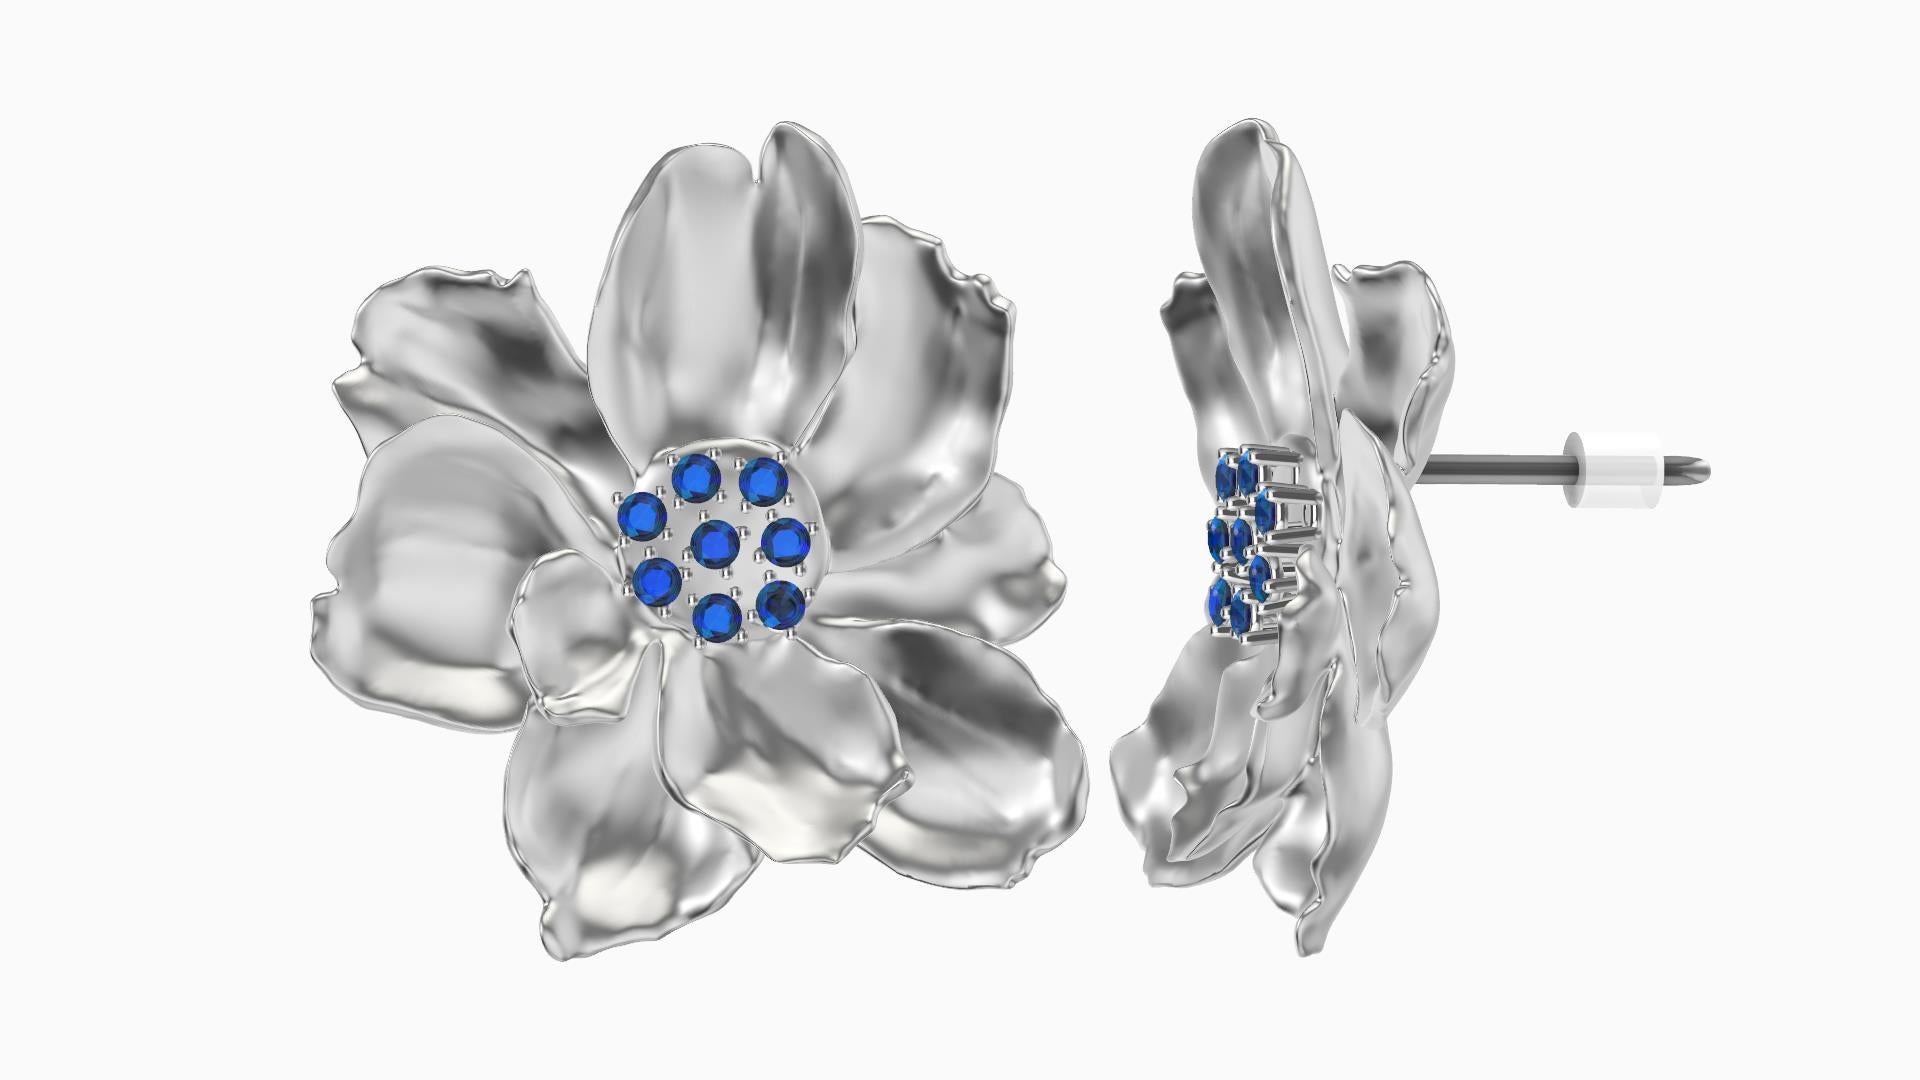 14 Karat White Gold Wild Flower Earrings with Sapphires, Tiffany Designer Thomas Kurilla sculpted these exclusively for 1stdibs. Boredom causes us to challenge ourselves. Working from life especially during the covid  virus could push us two ways .